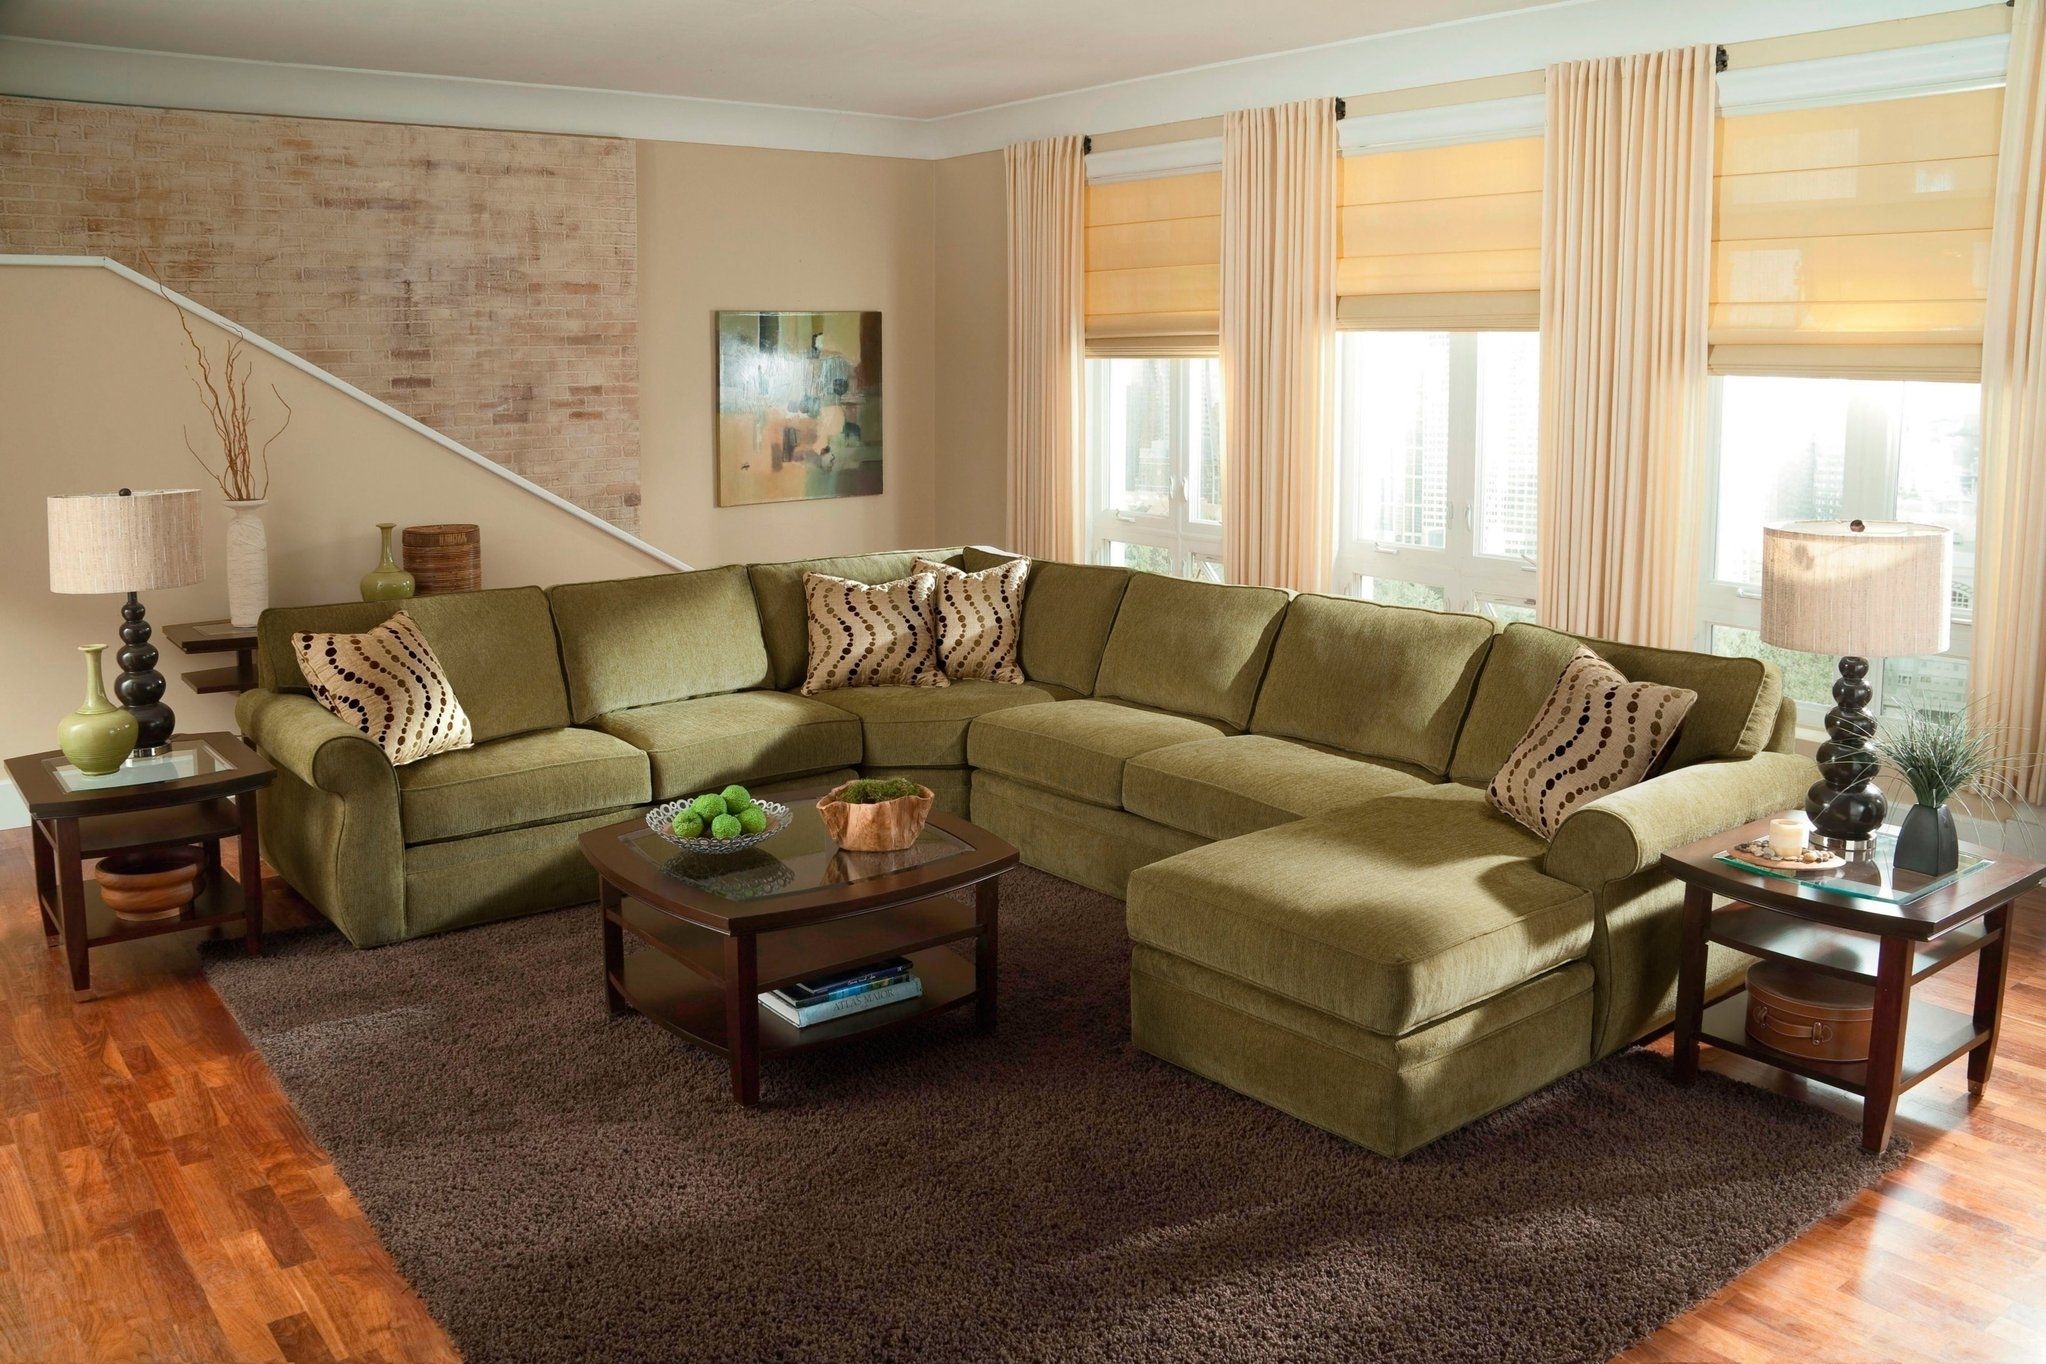 Large Scale U Shaped Sectional Sofa Set | Many Fabric Options 11410 For Big U Shaped Couches (View 14 of 15)